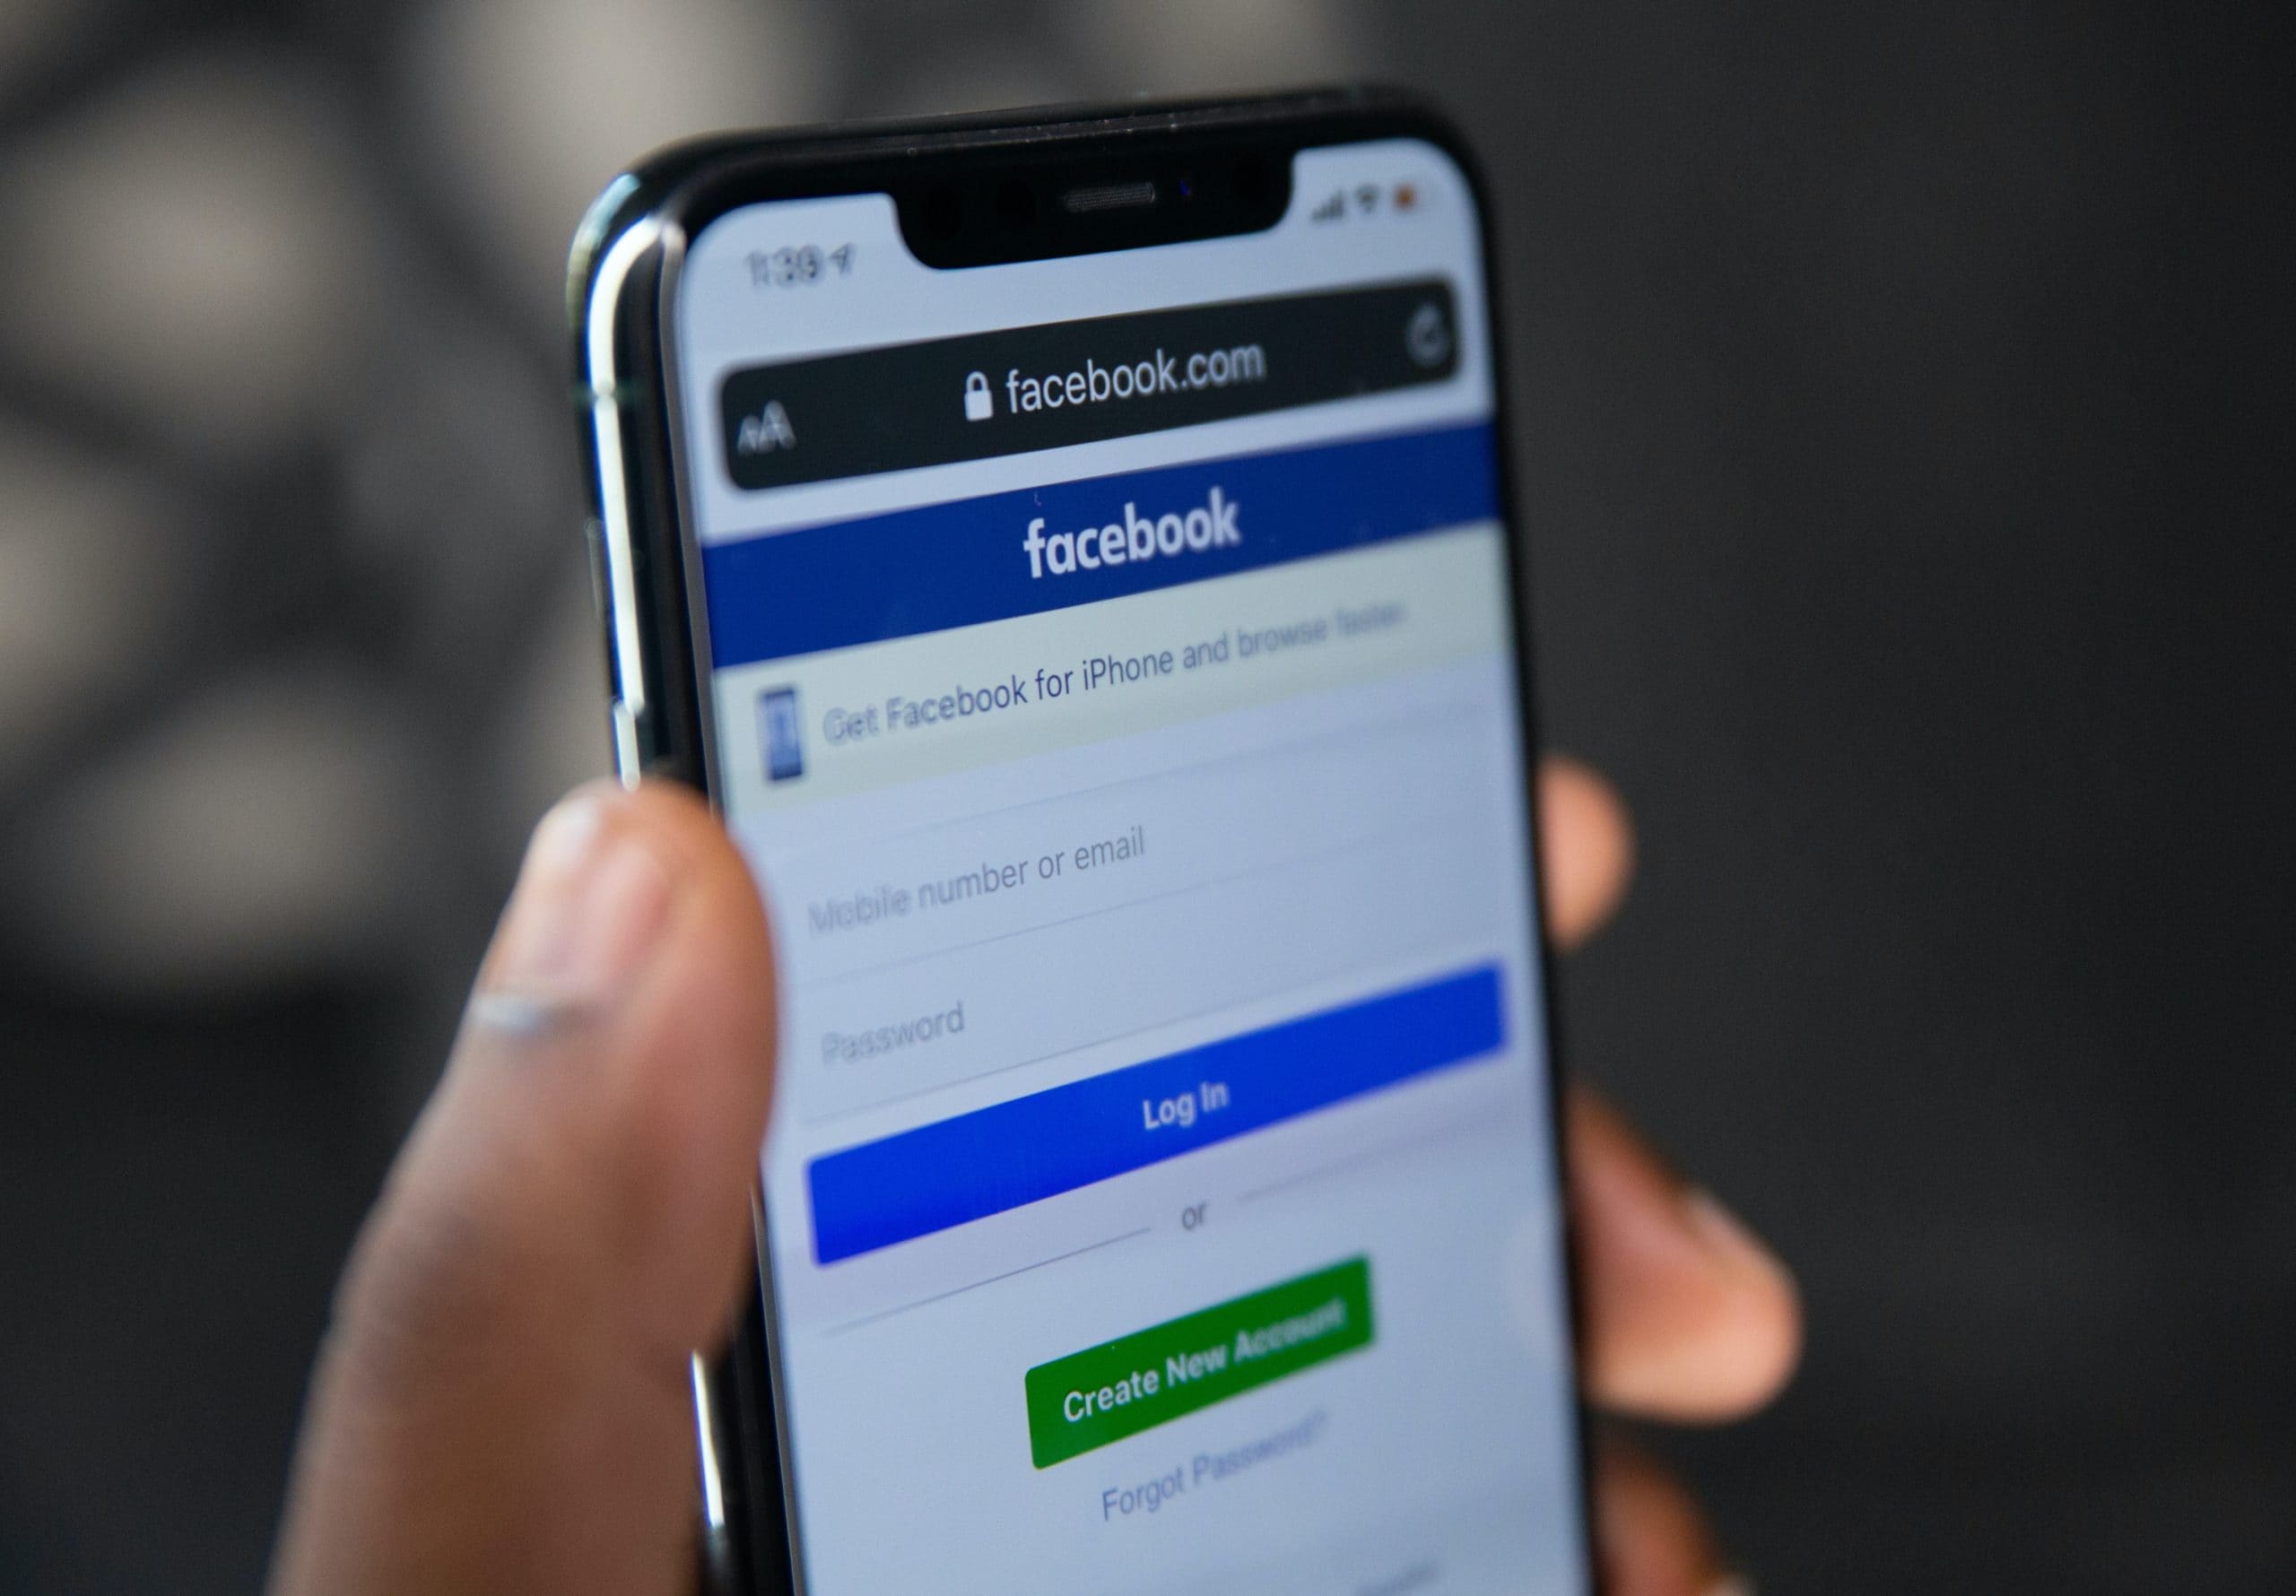 Facebook Marketing Company sued by Meta for Fake Reviews - Klein Moynihan Turco LLP